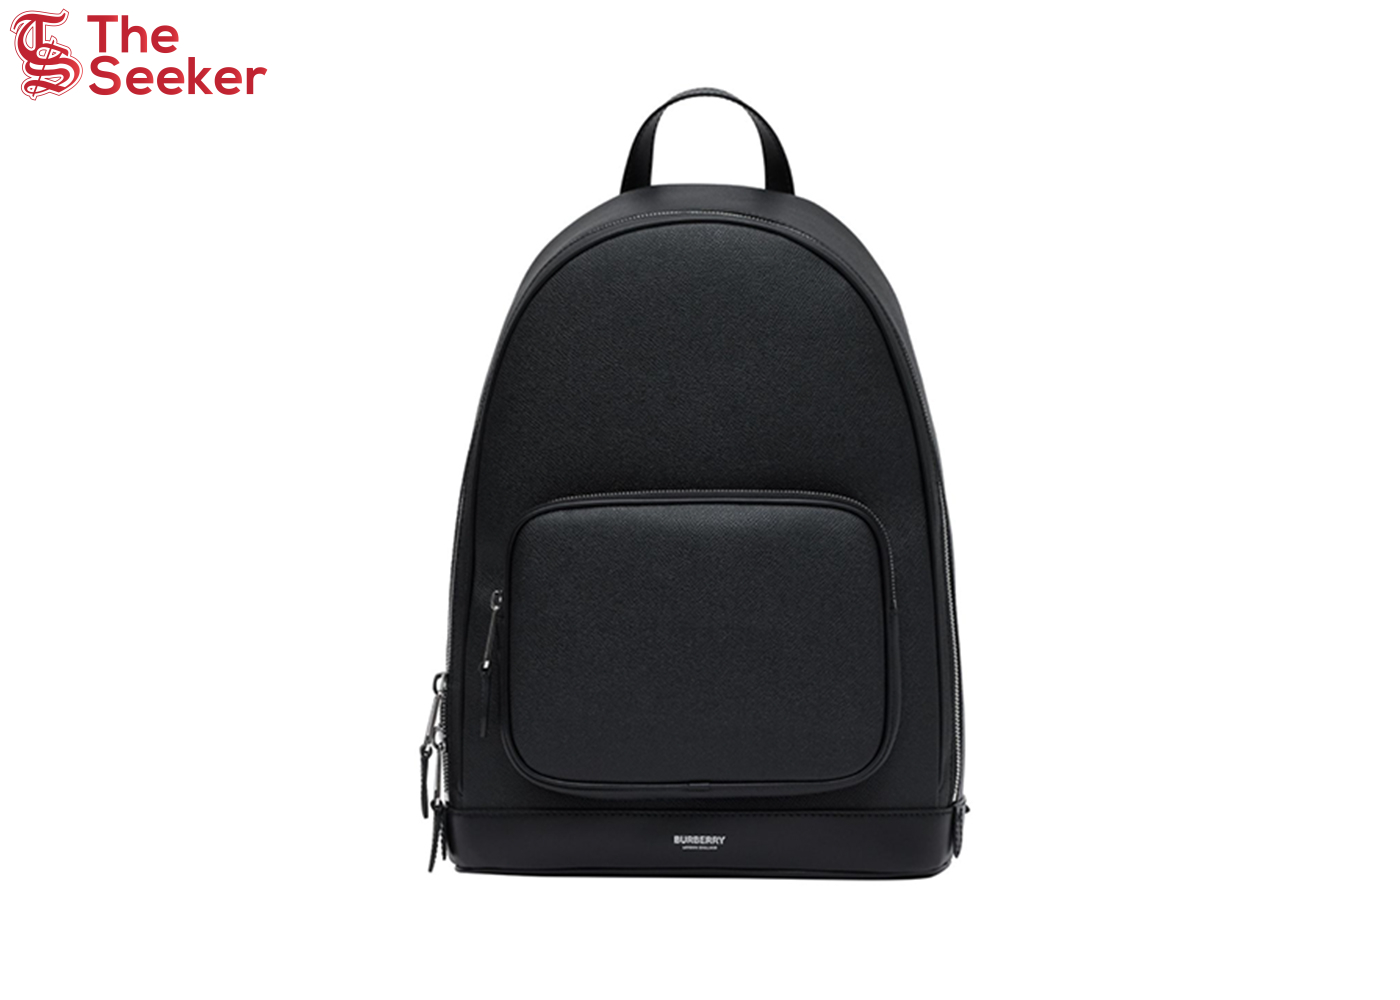 Burberry Grainy Leather Backpack Black